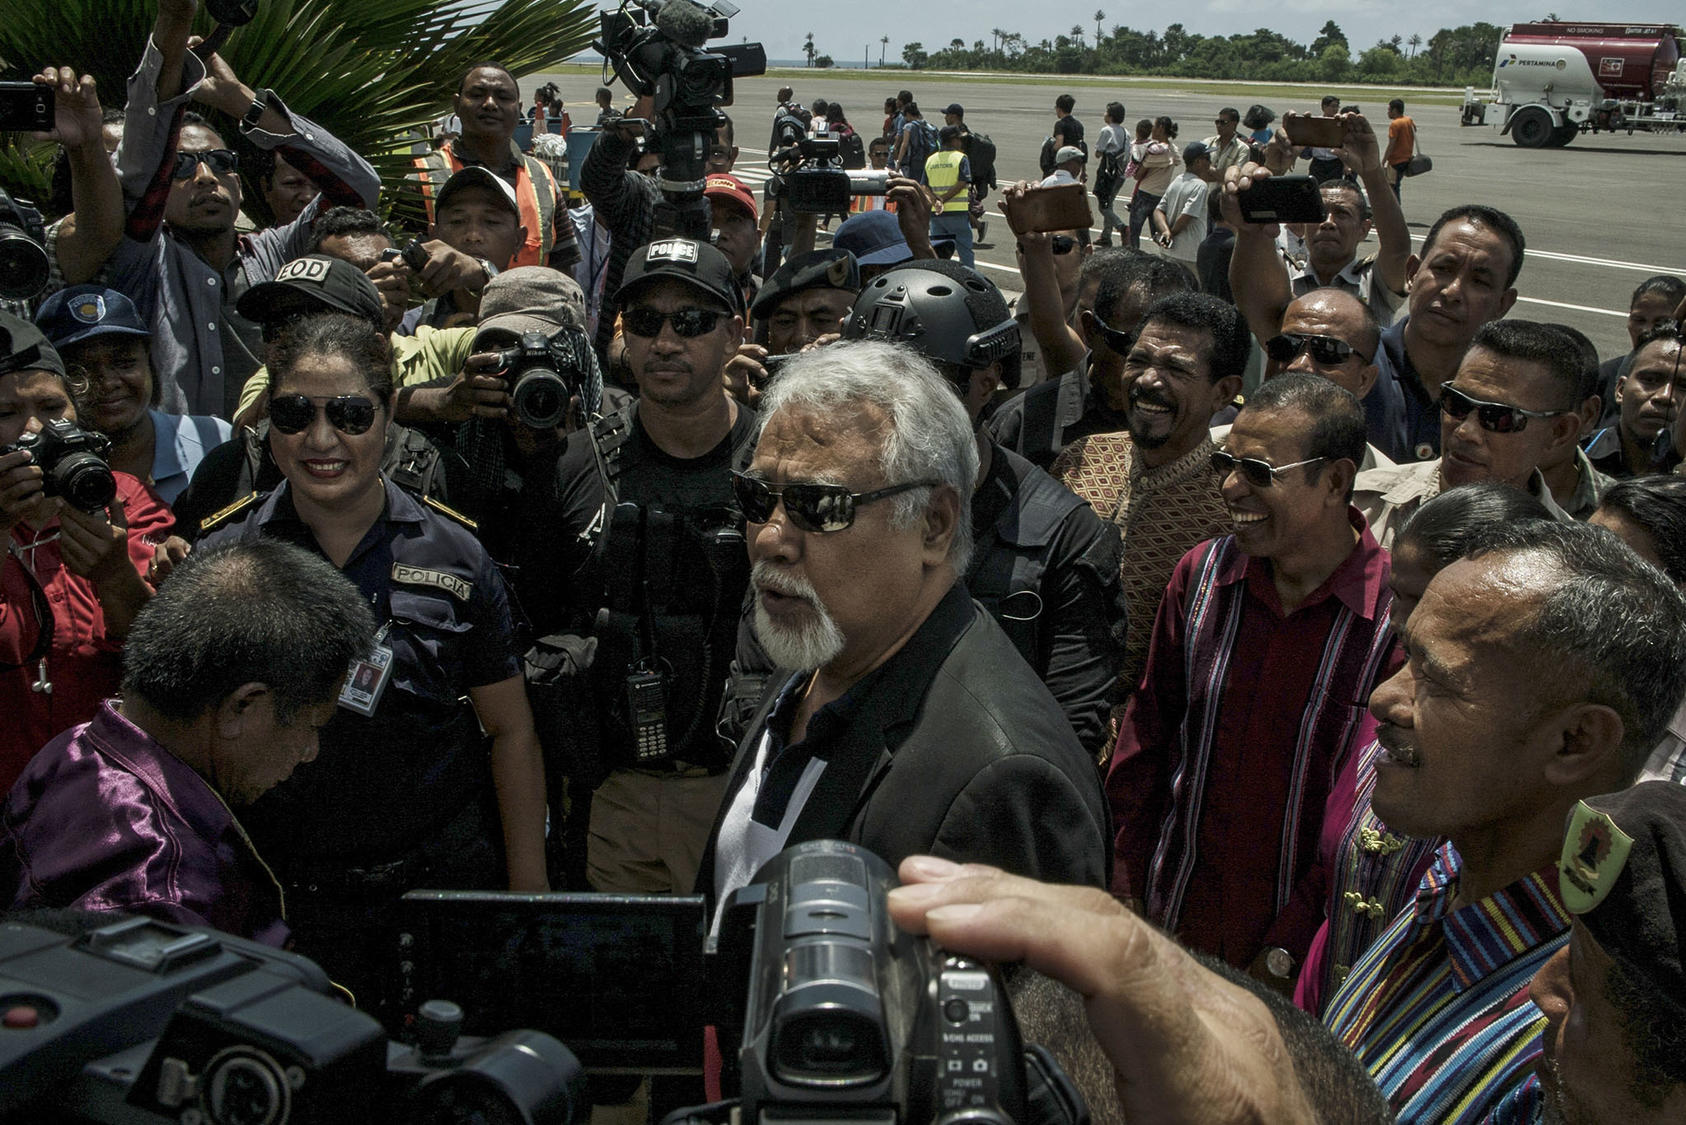 Xanana Gusmão, Timor-Leste’s longtime leader, arrives in the country's capital of Dili after months of negotiations with Australia over a revised maritime border, March 11, 2018. (Ben C. Solomon/The New York Times)